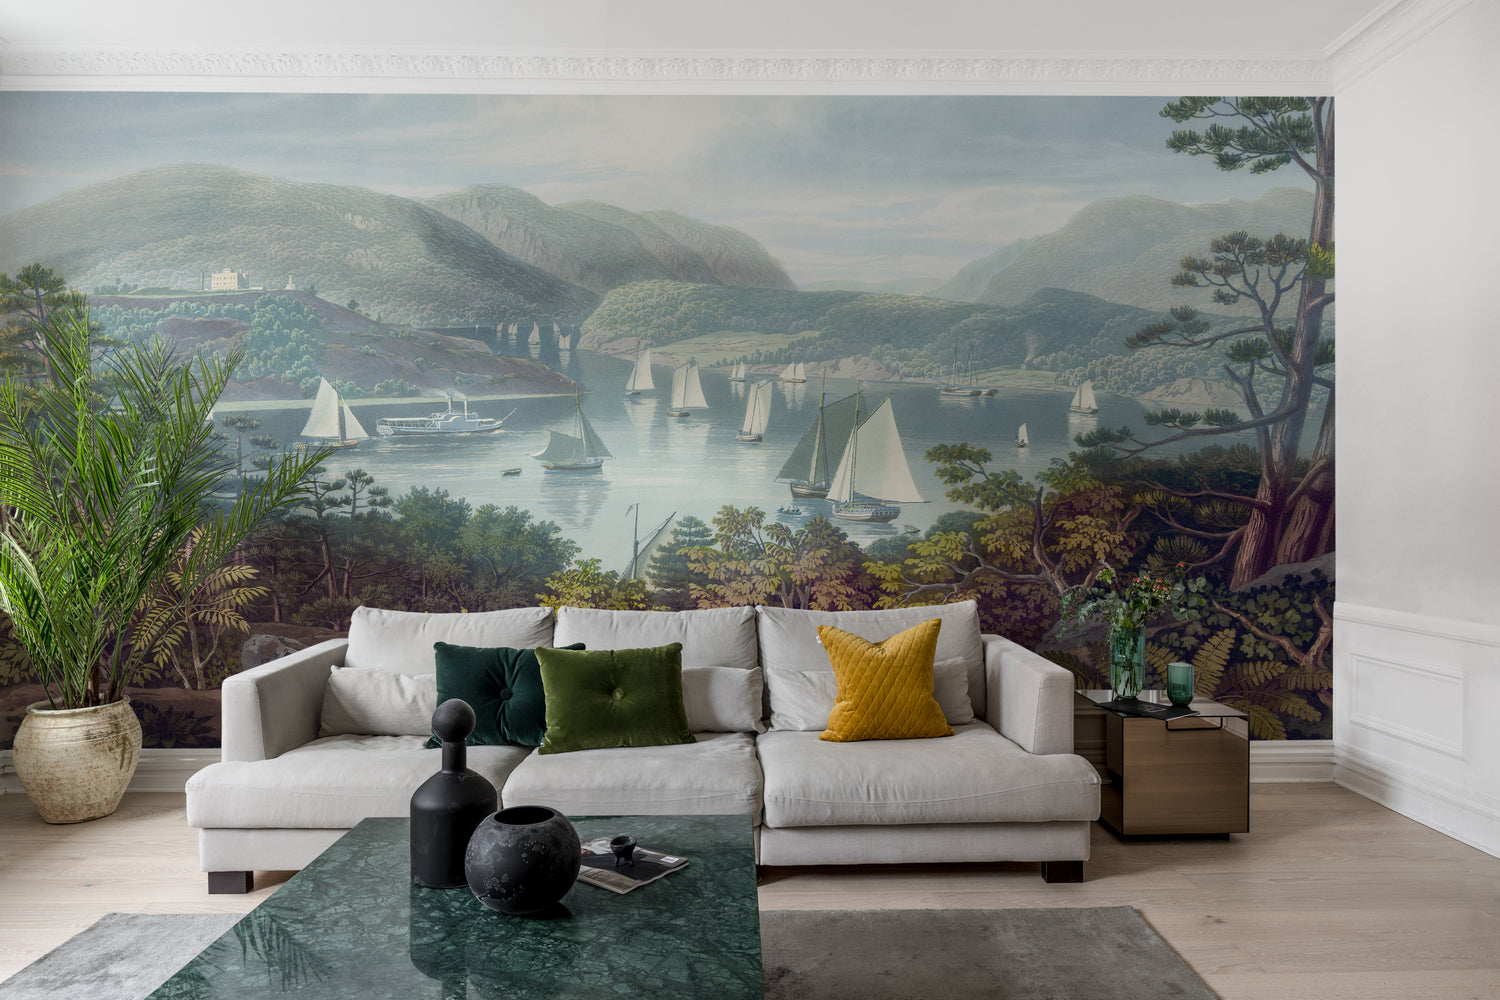 Safe Heaven, Landscape Mural Wallpaper in featured on the wall of a living area with sofa and coffee table.